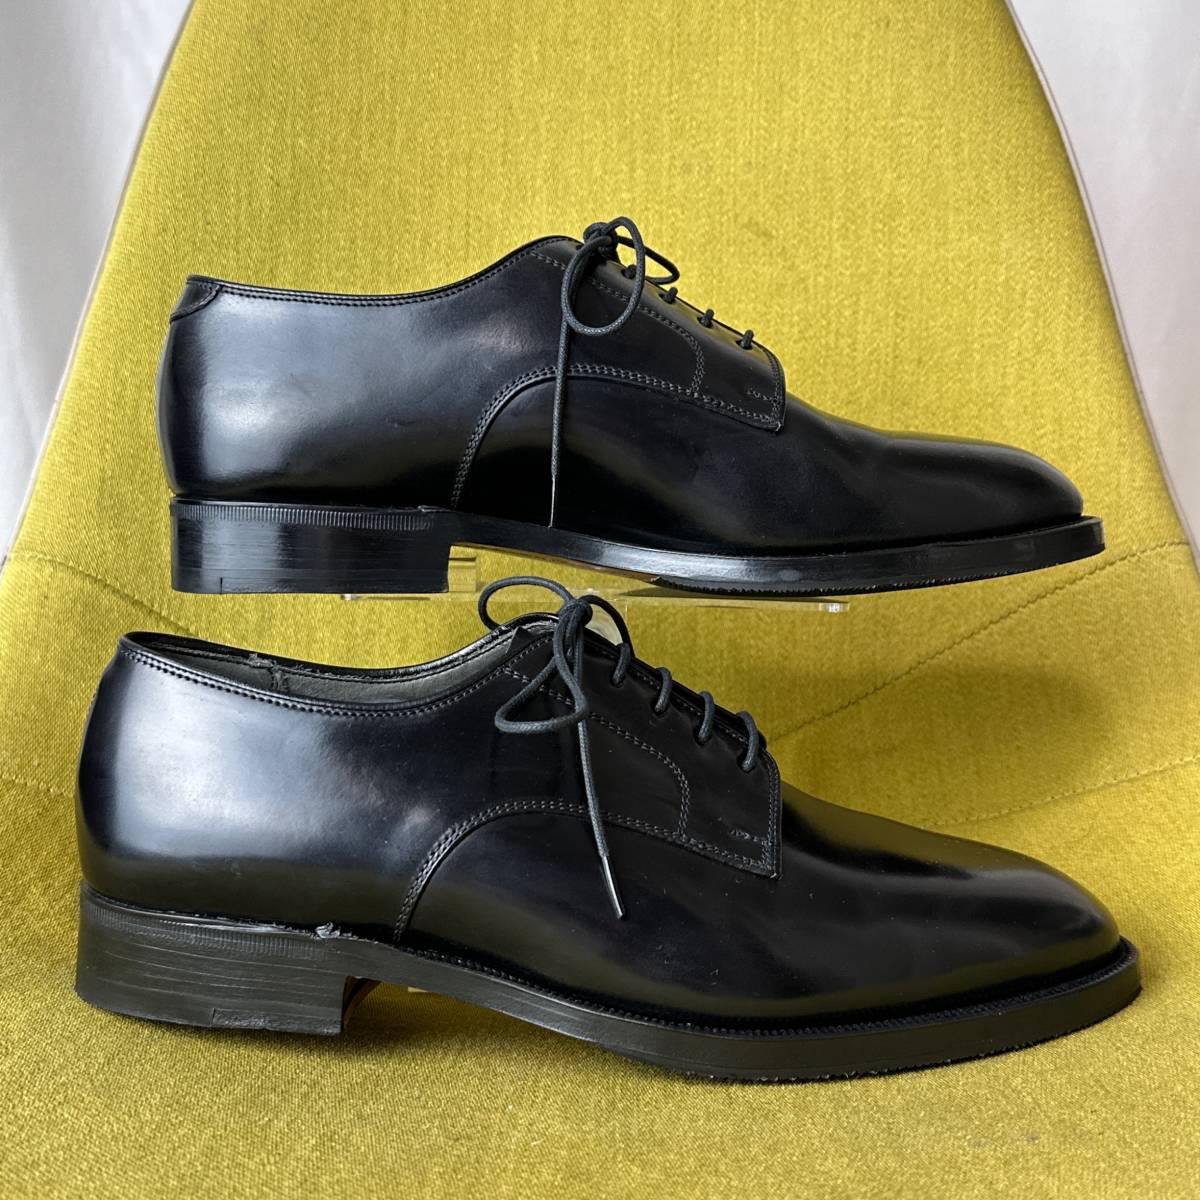  beautiful goods JARMAN german REGENCY COLLECTION plain tu cordovan leather shoes 25.0EE made in Japan chiyoda made Vintage 